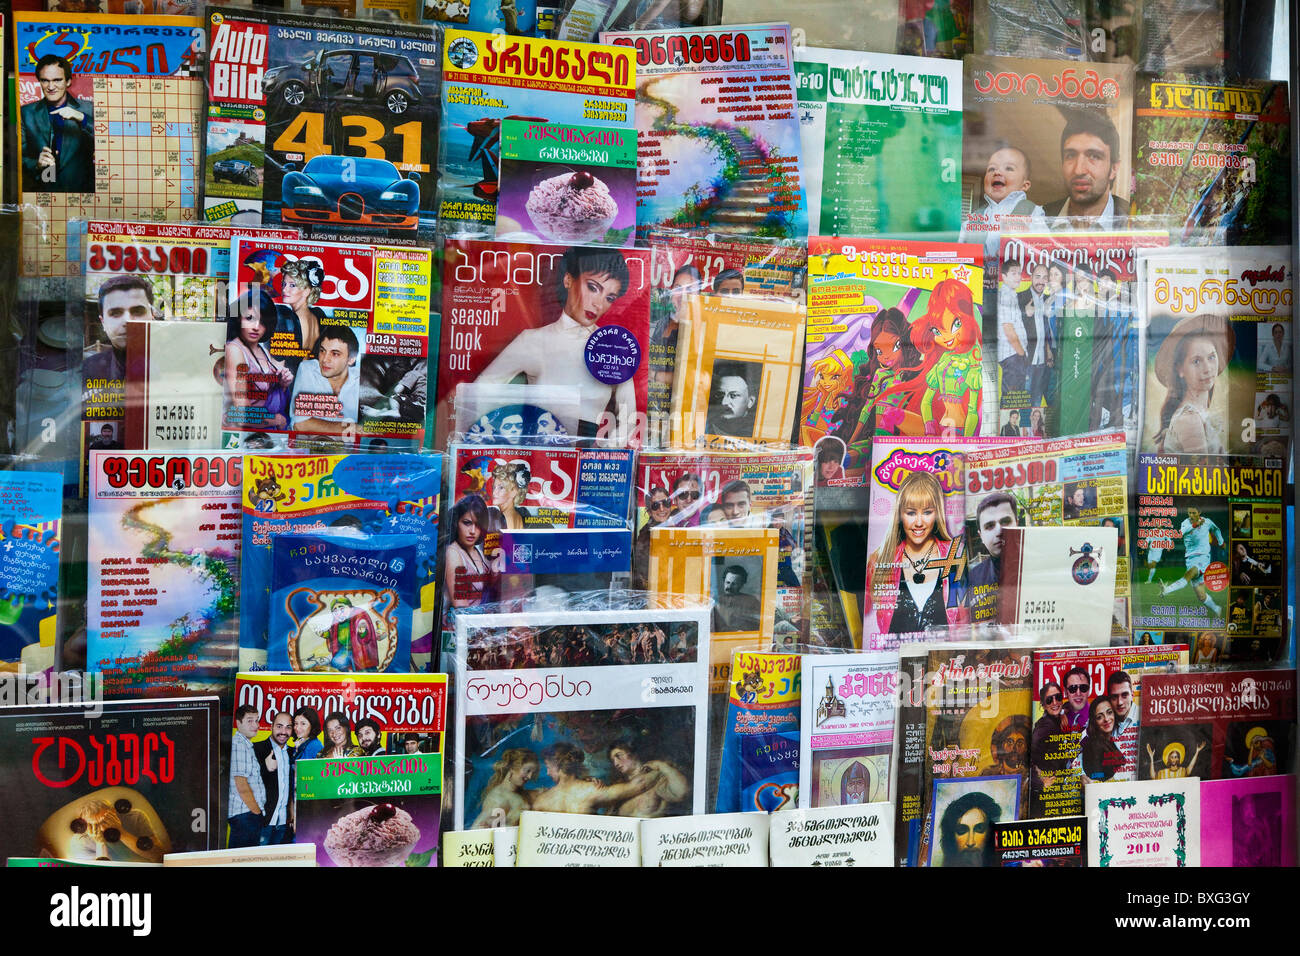 Magazines and periodicals on the side of a news stand or kiosk in the street in Tbilisi, Georgia. JMH3965 Stock Photo